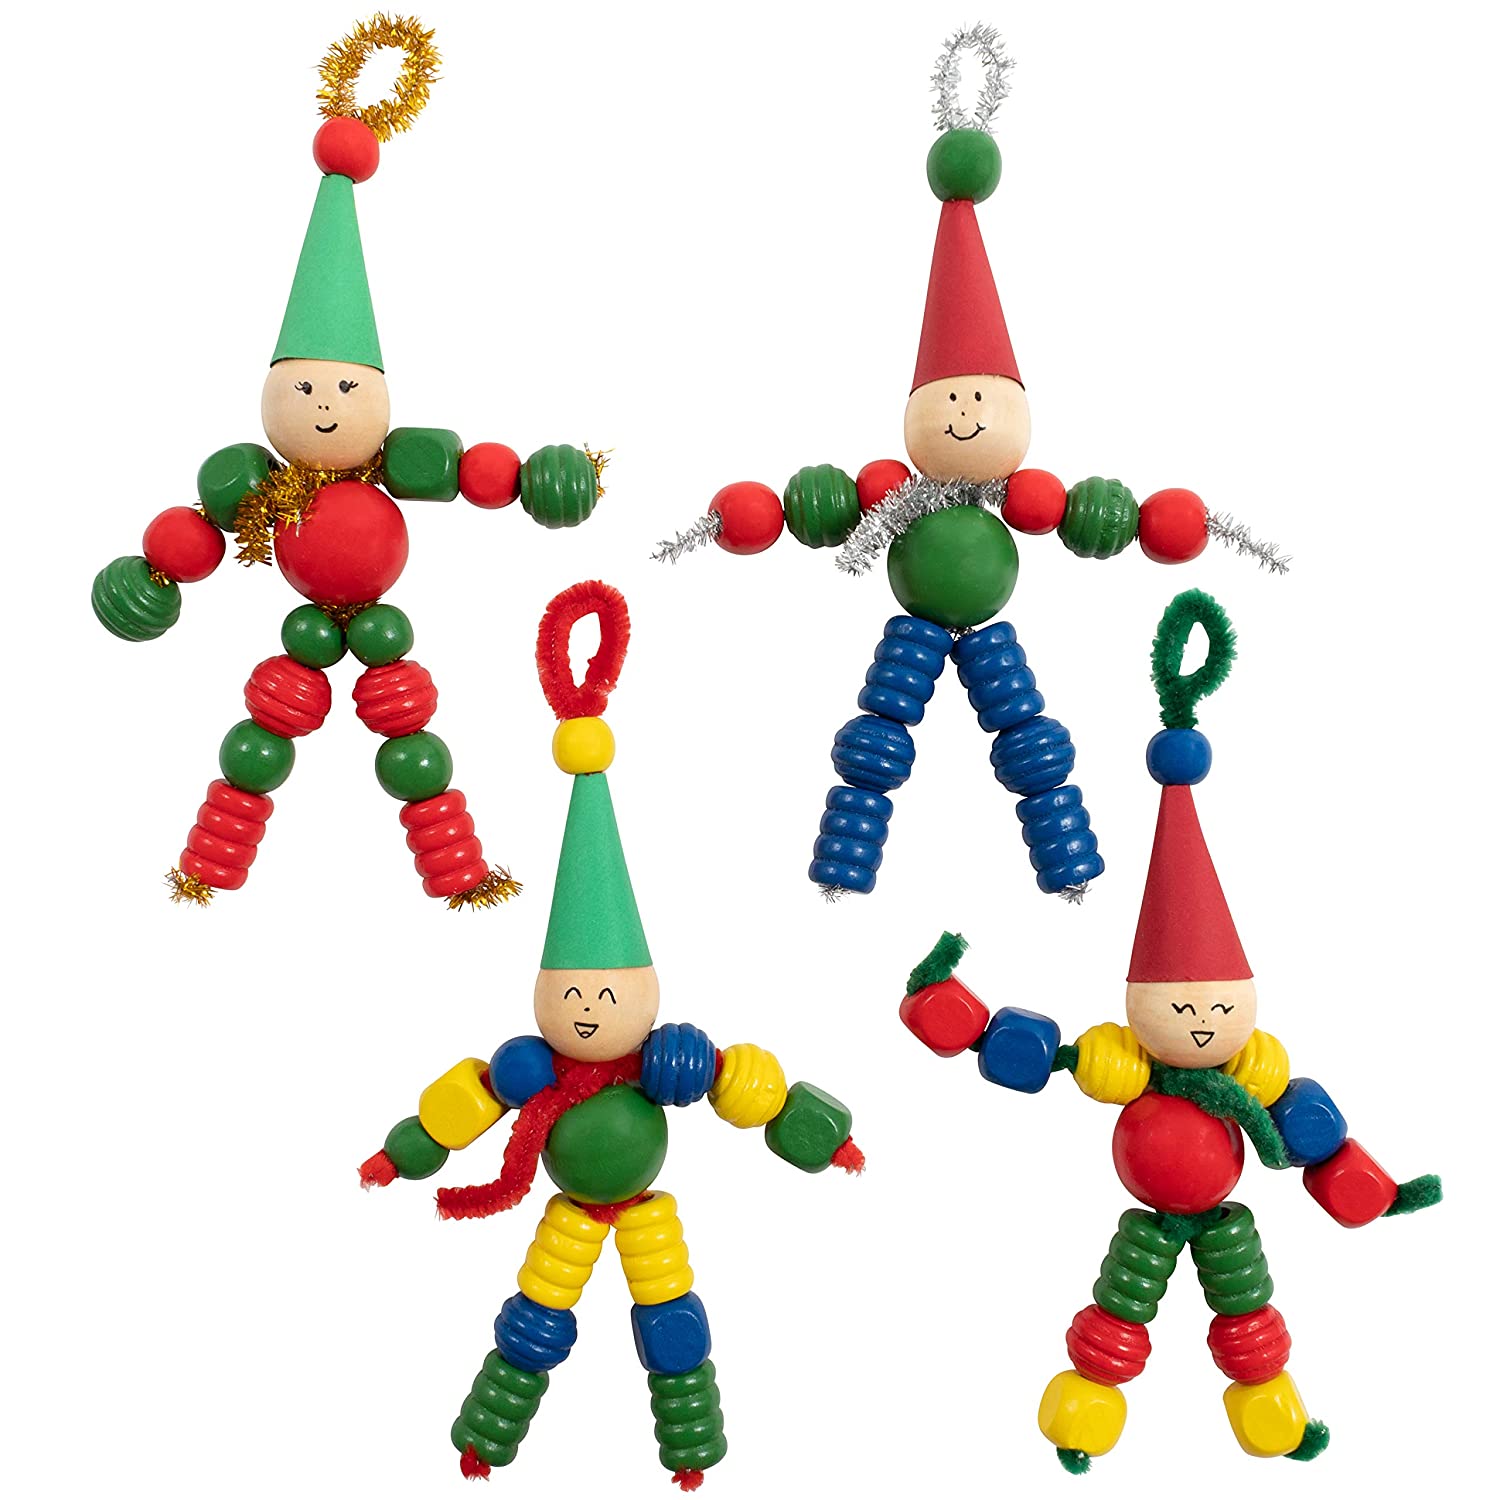 READY 2 LEARN Christmas Crafts - Create Your Own Bead Elves - Set of 4 - DIY Ornaments for Kids - Christmas Tree Decoration - All Materials Included